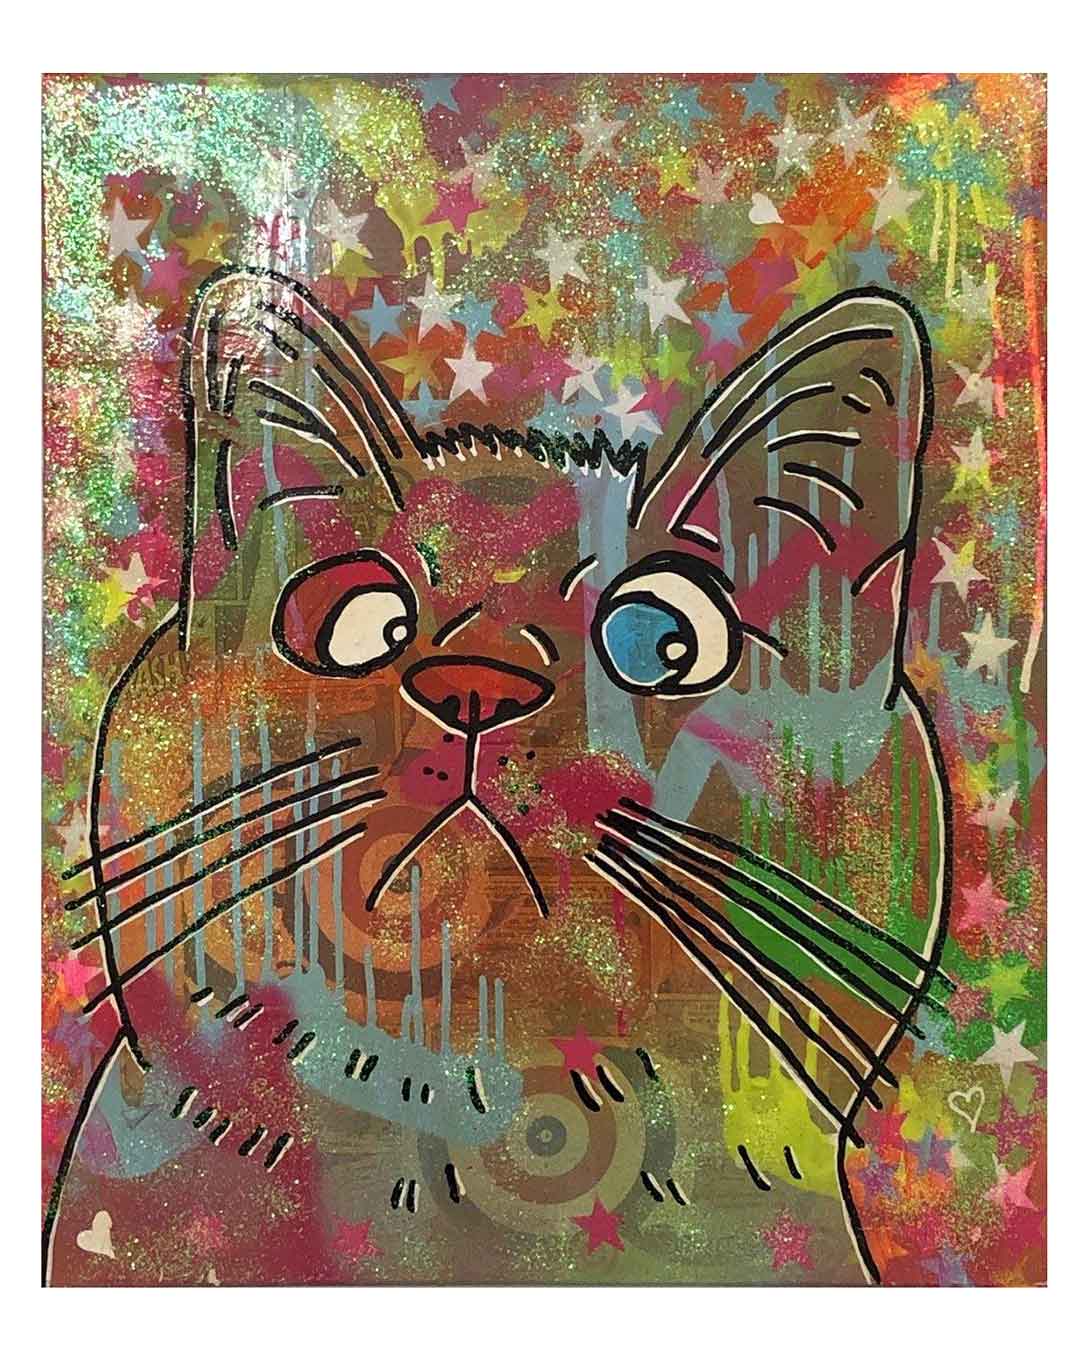 Graffiti Cosmic Moggy Painting by Barrie J Davies 2015, mixed media on canvas, unframed, 50cm x 60cm.